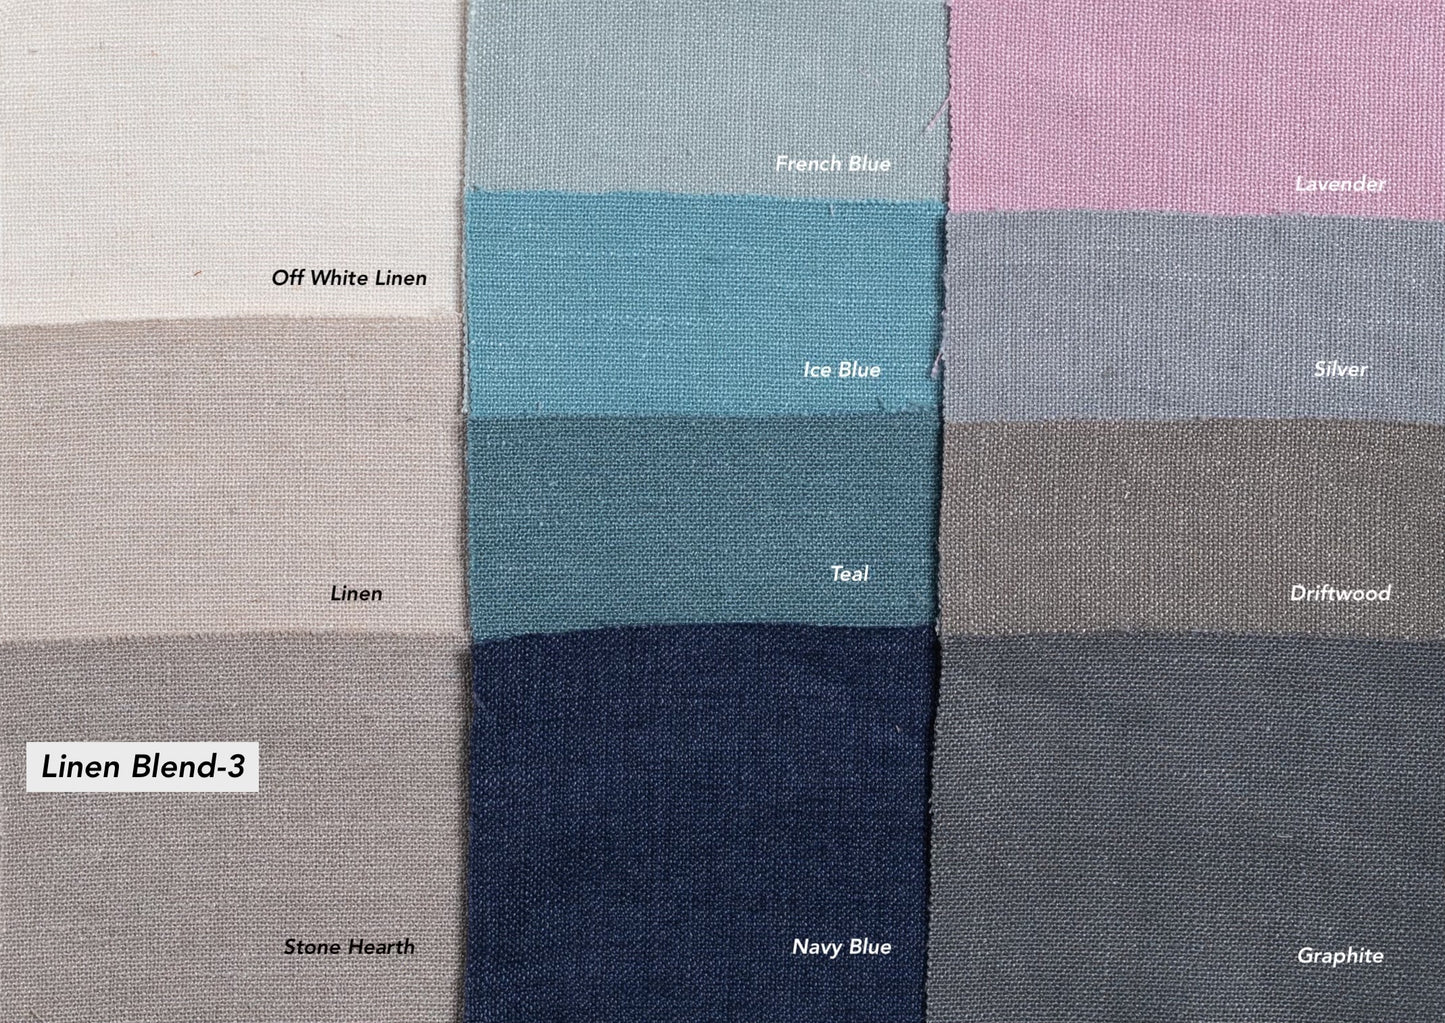 Fabric Swatches Linen Poly Blend-3, Shades and Curtain Fabric Swatches, Trim Colors